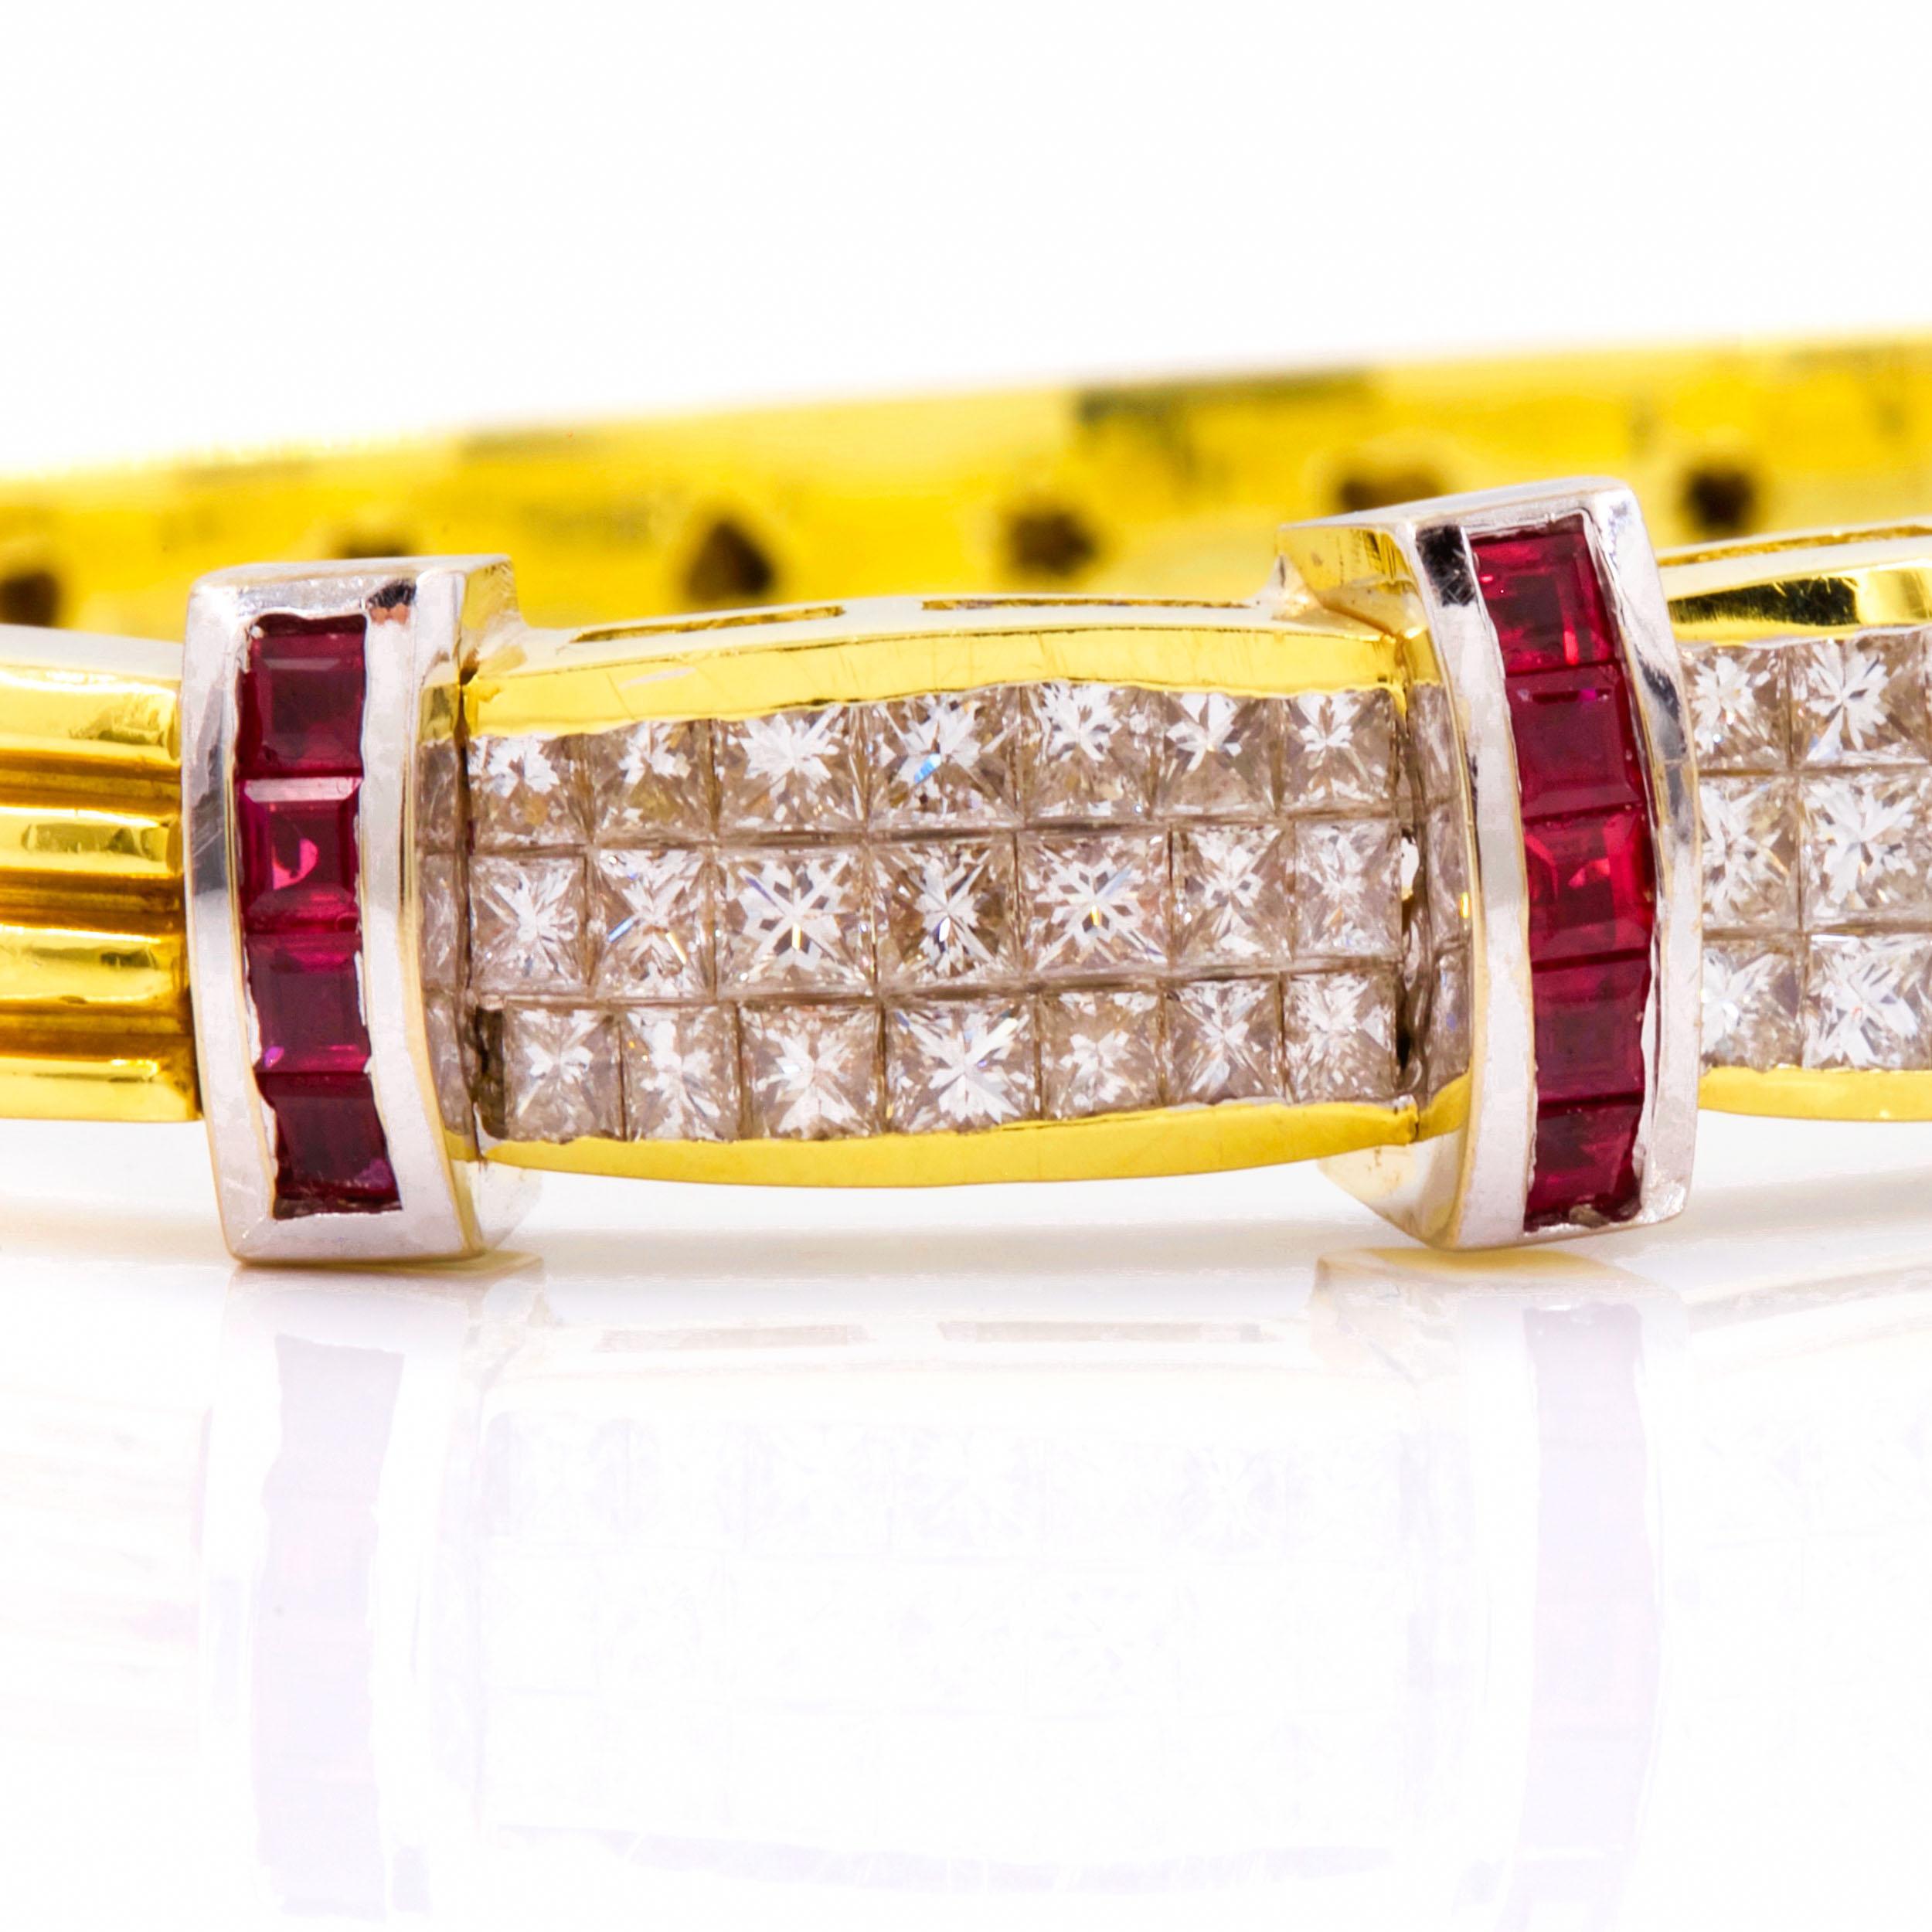 18K YELLOW AND WHITE GOLD RUBY AND DIAMOND BANGLE BRACELET
63 diamonds, 18 rubies, 58.5 grams total weight
Item # 012WGP03E 

An extremely fine bracelet crafted of 18k yellow gold with a reeded outer edge and a high-polish inner surface with stamped